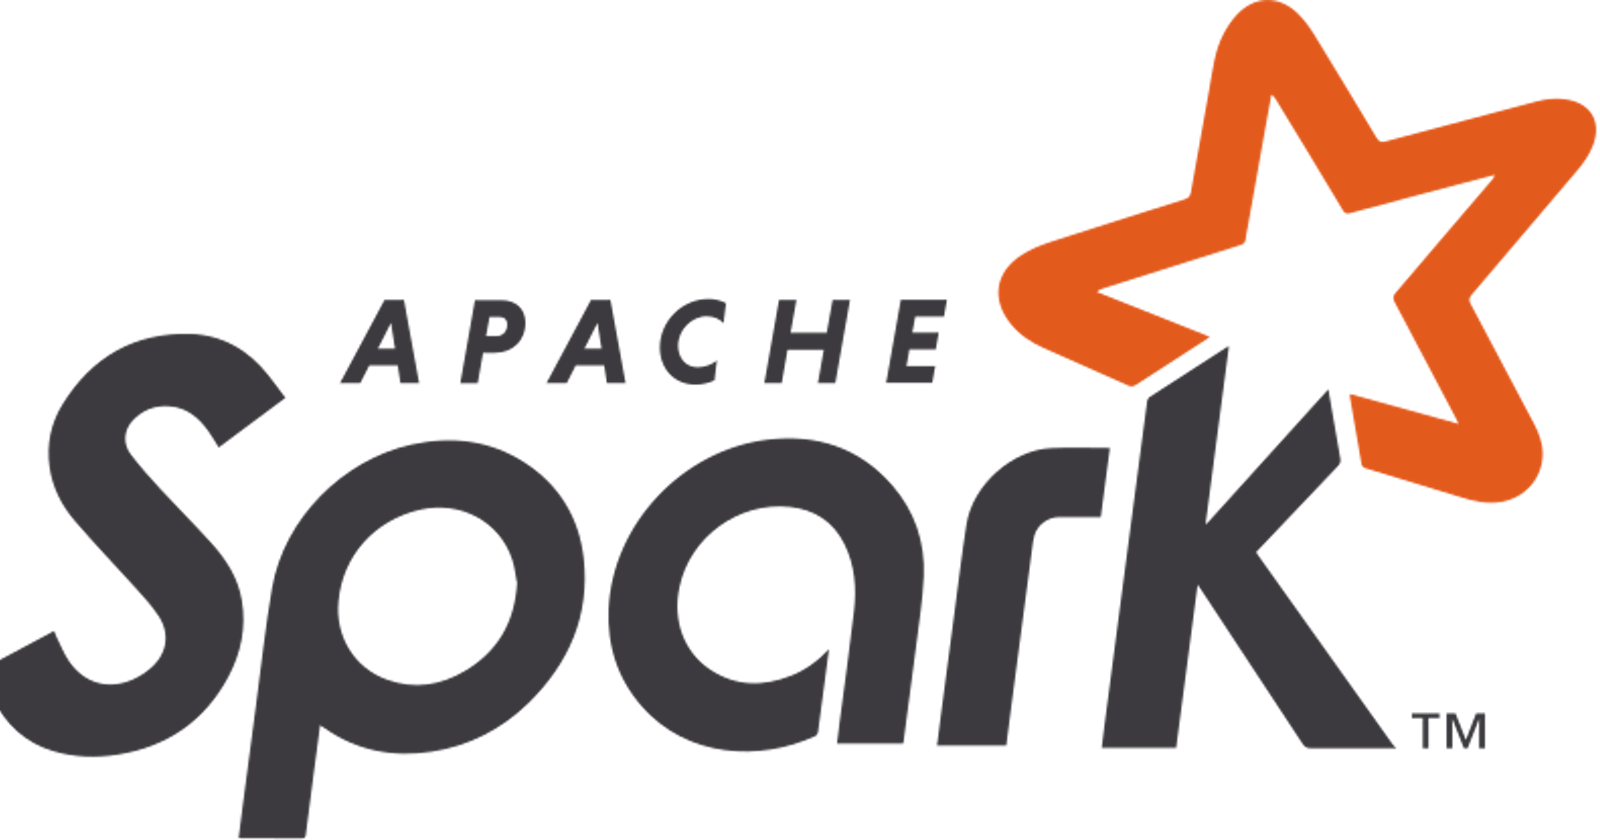 PySpark UDFs, Spark-NLP, and scrapping unstructured text data on spark clusters — a complete ETL pipeline for BigData architecture